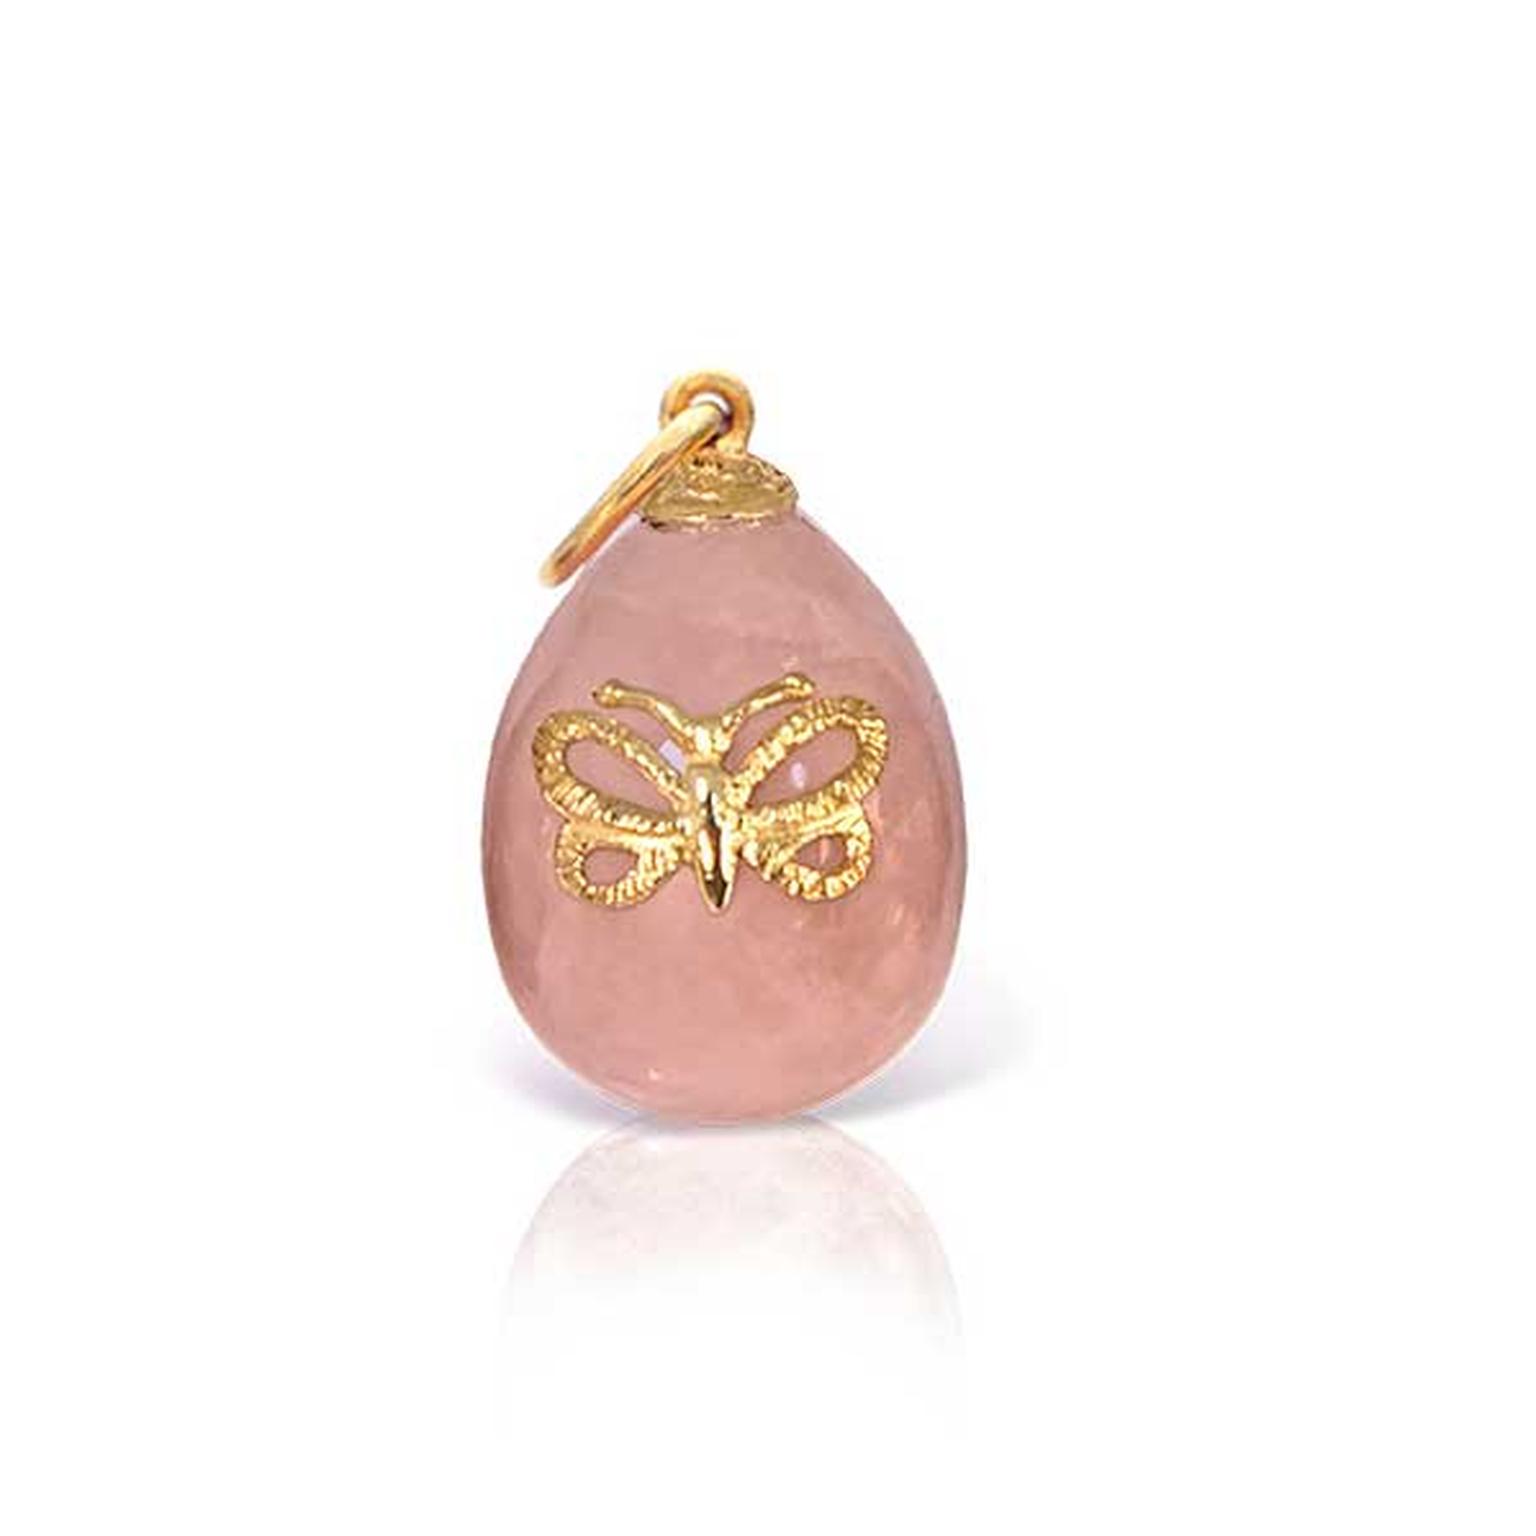 Lalaounis Easter egg pendant in rose quartz with butterfly motif in gold